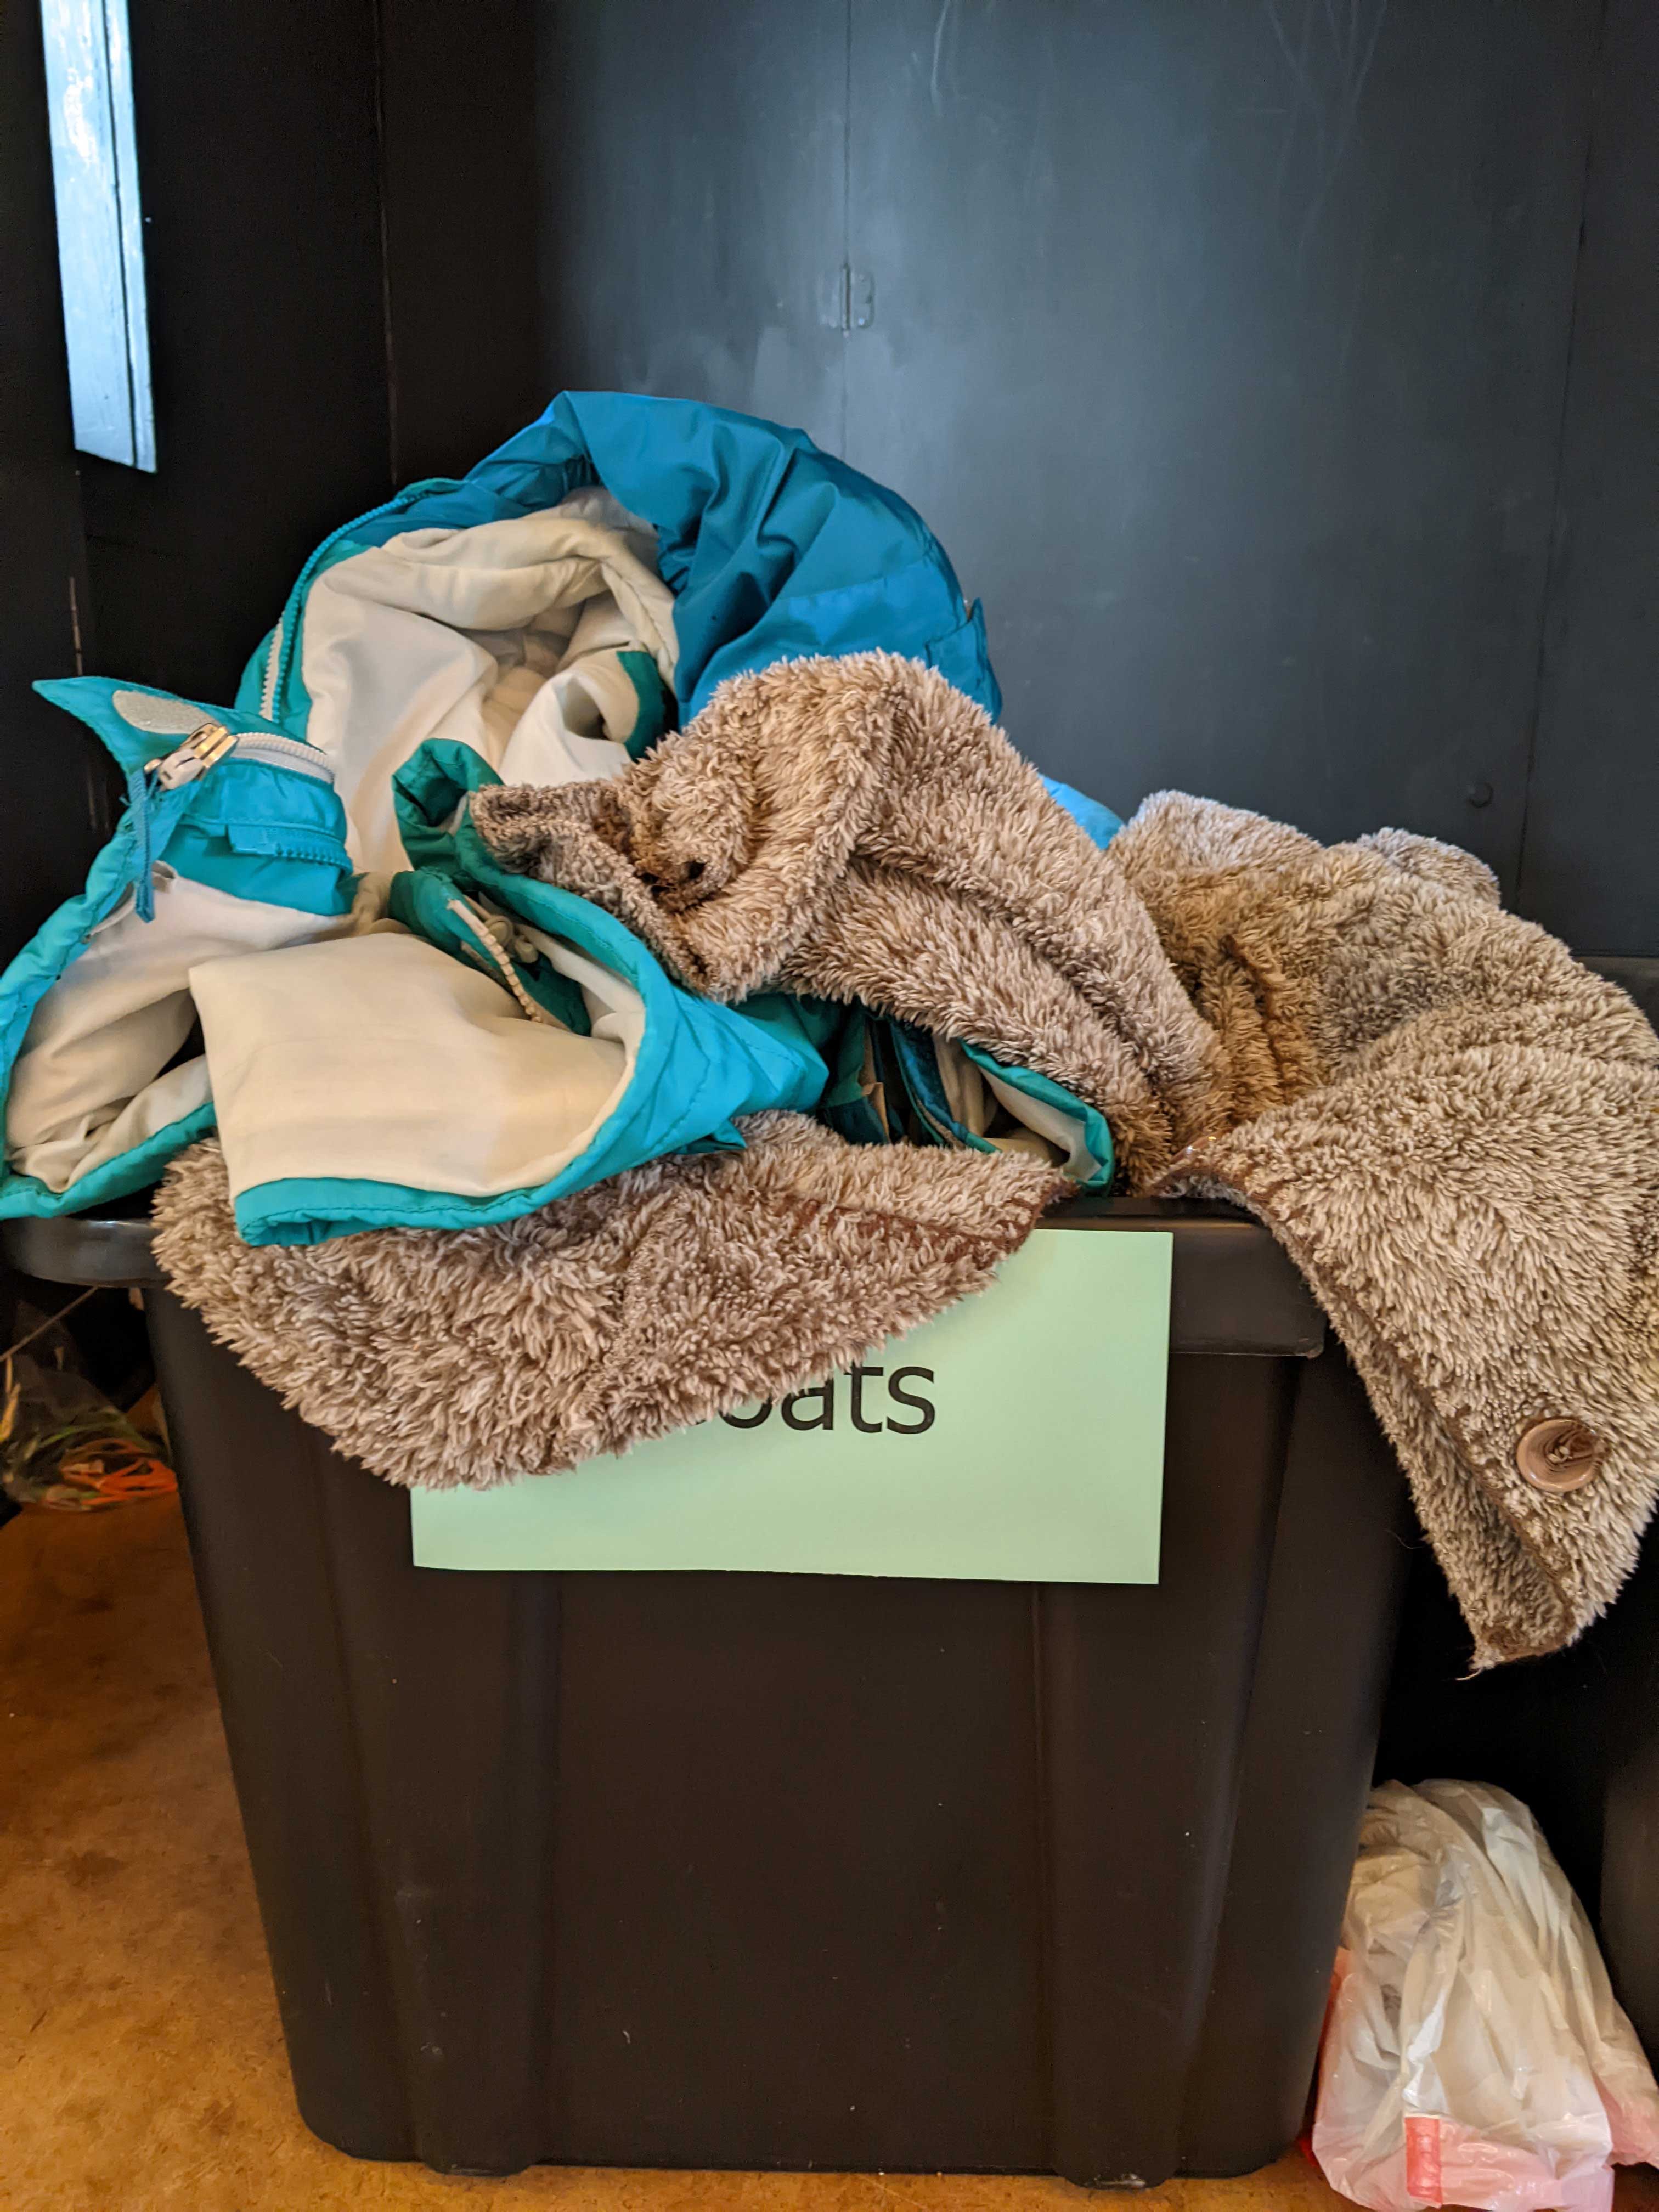 Open House photo of coats donated.